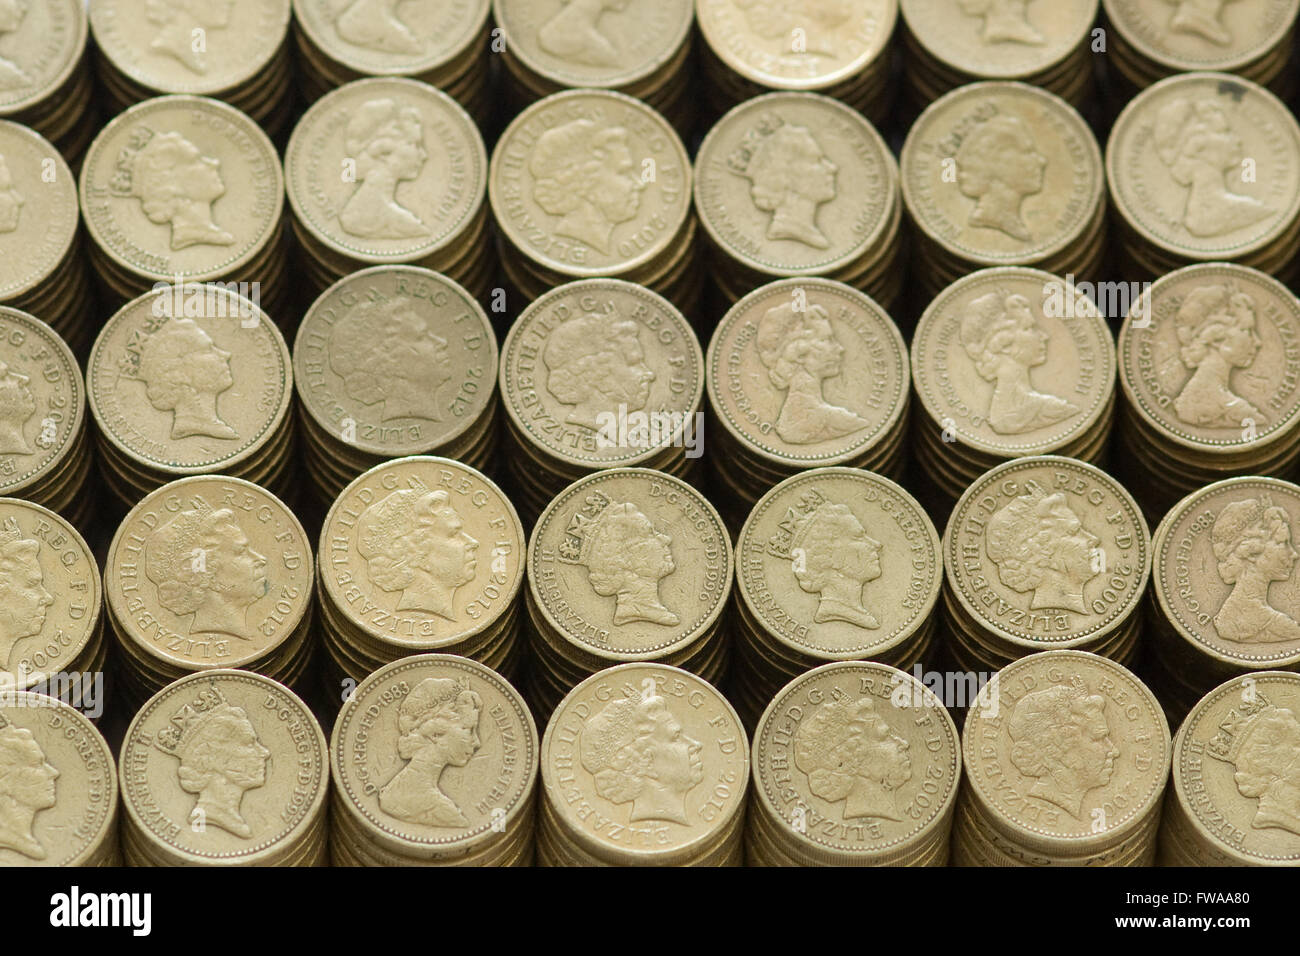 old one pound coins from a piggy bank Stock Photo